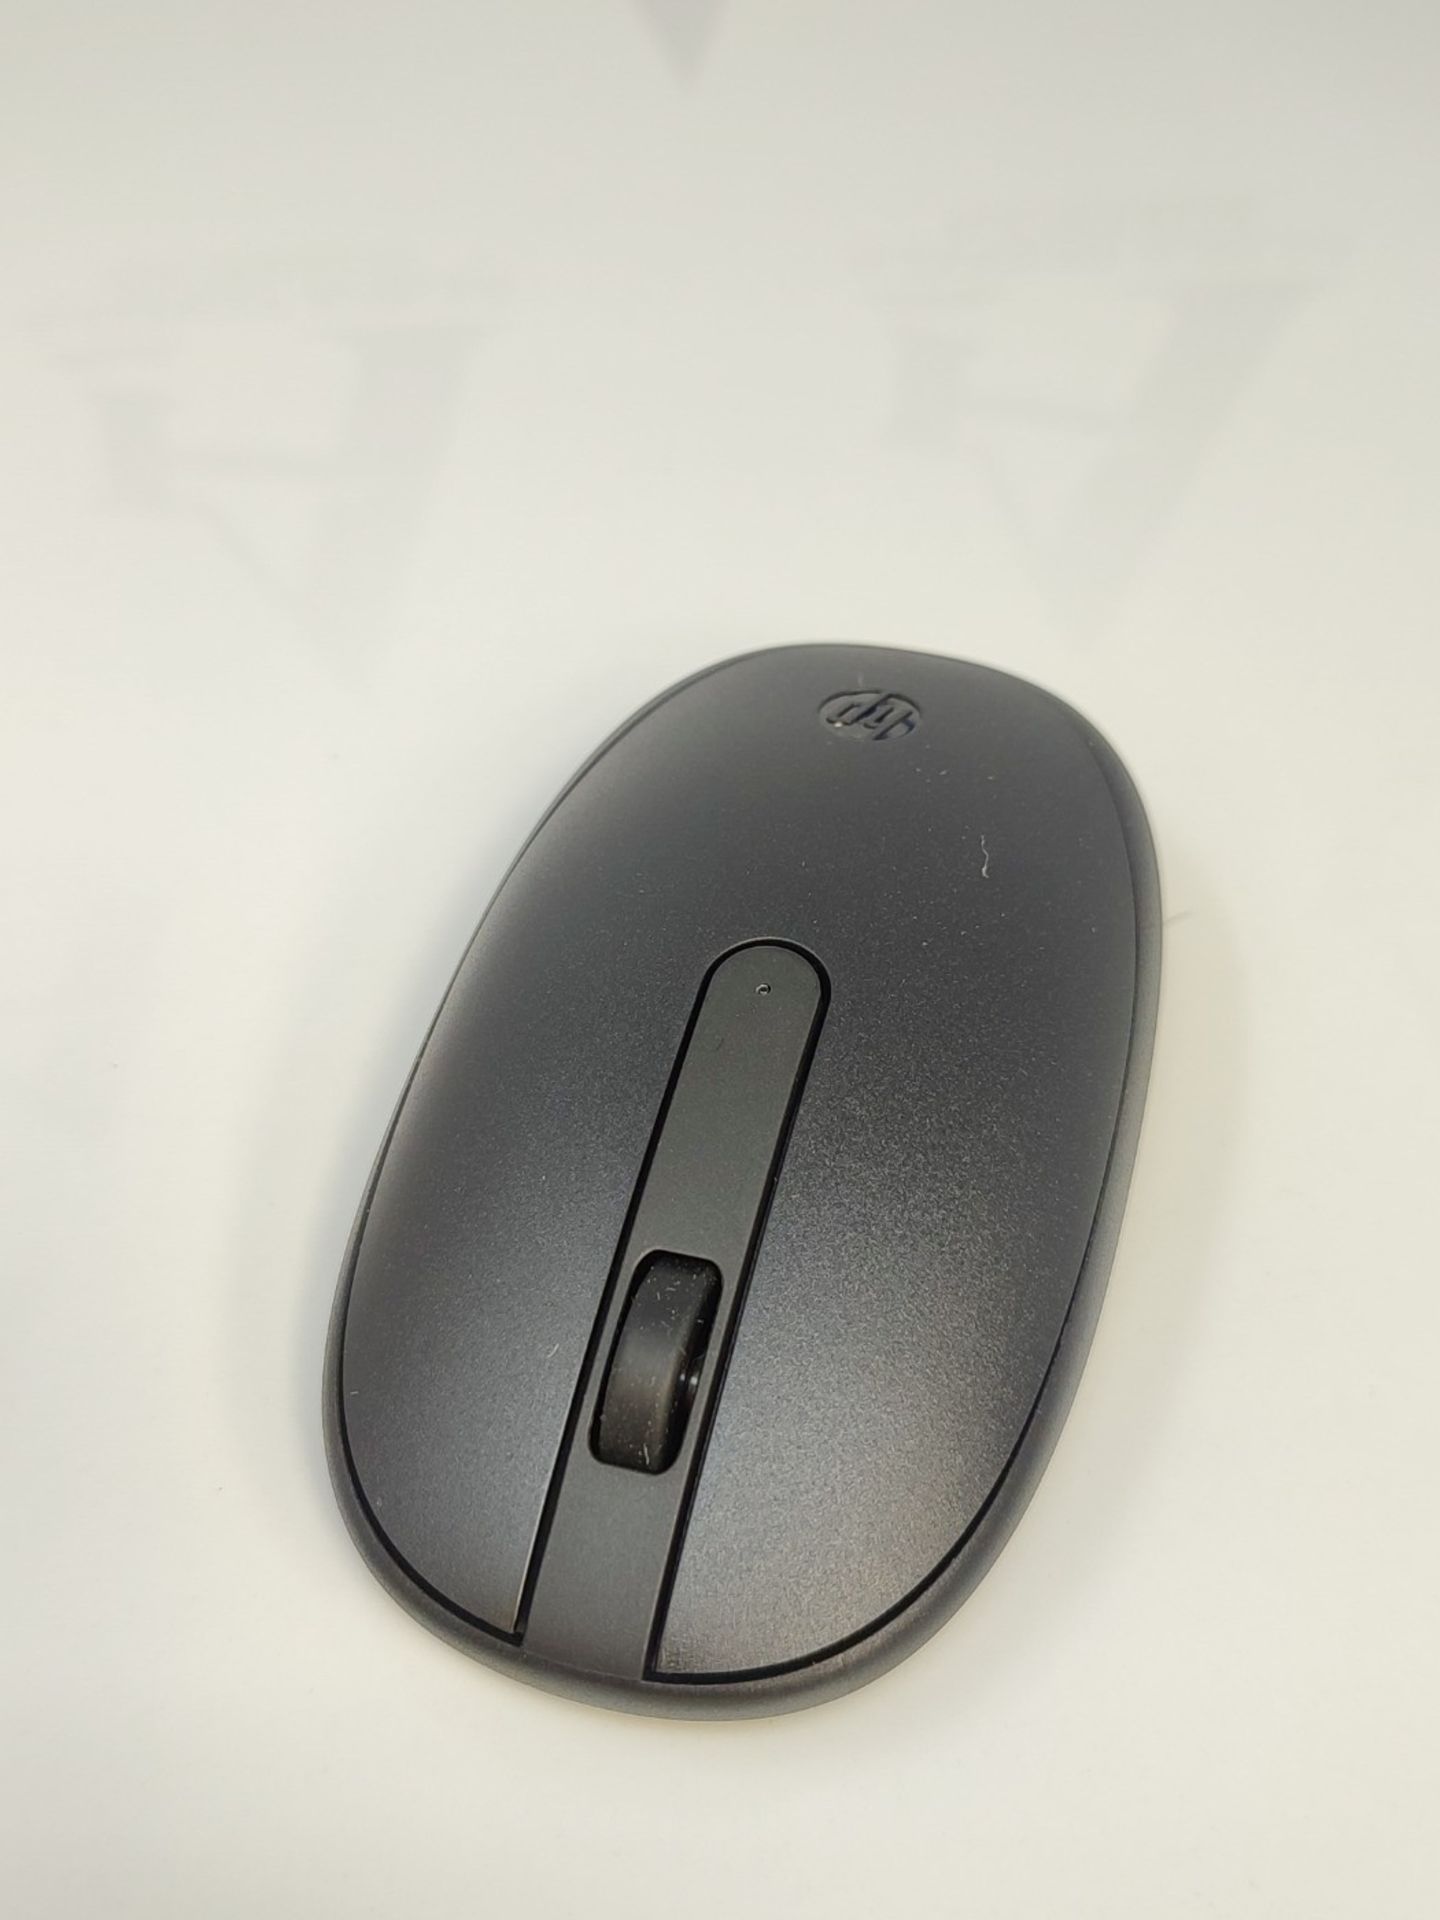 HP 240 Mouse Empire Wireless, 1600 DPI Optical Sensor, Bluetooth 5.1, 3 Buttons, Scrol - Image 3 of 3